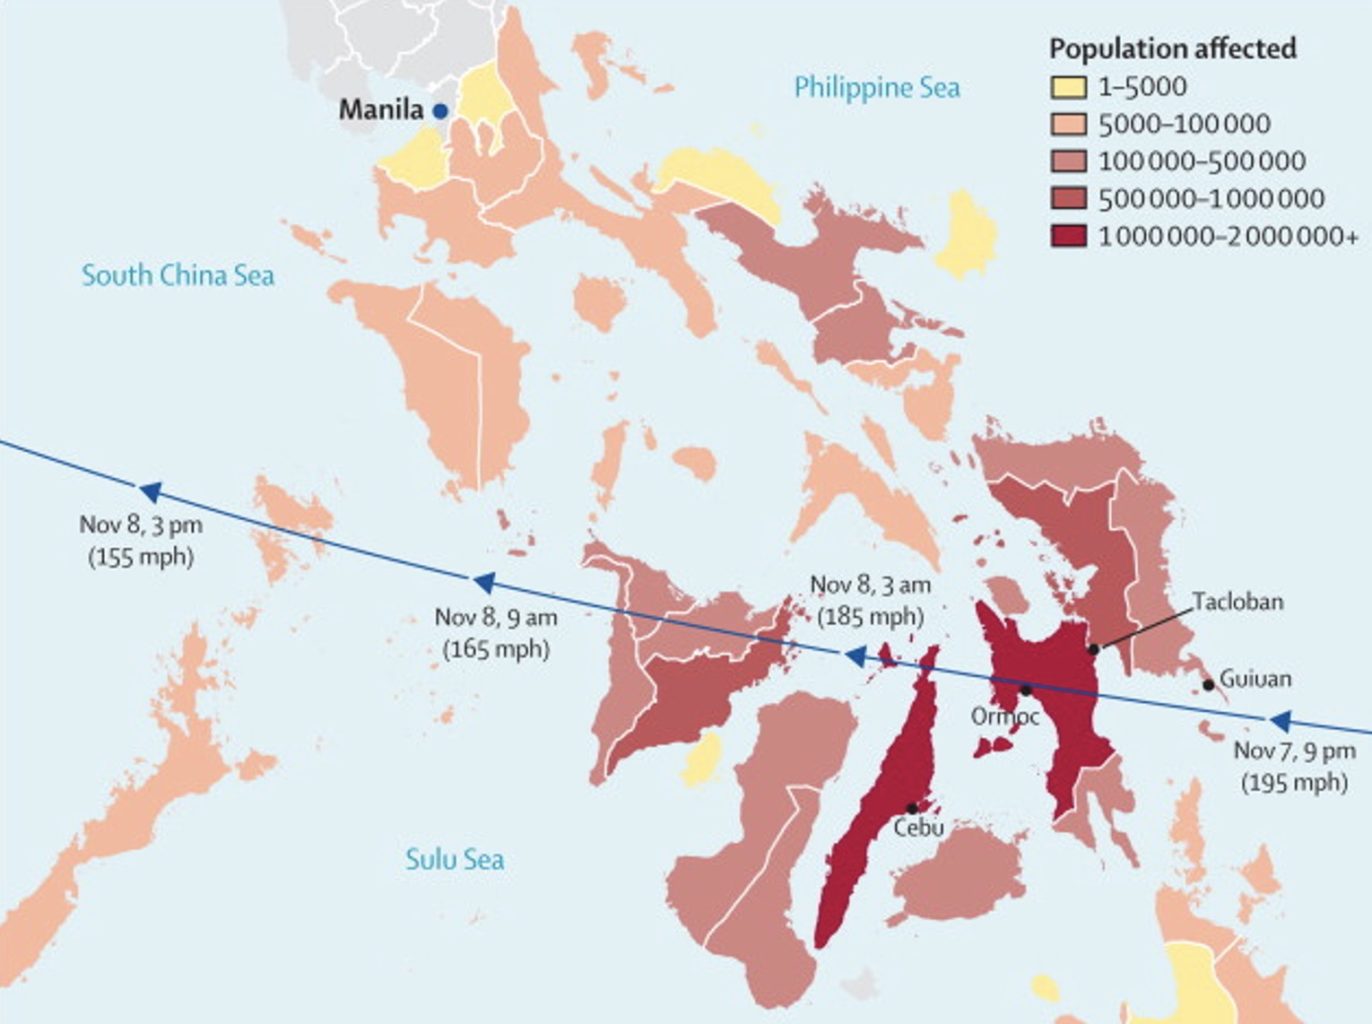 Figure 4 Path of typhoon Haiyan and the population affected